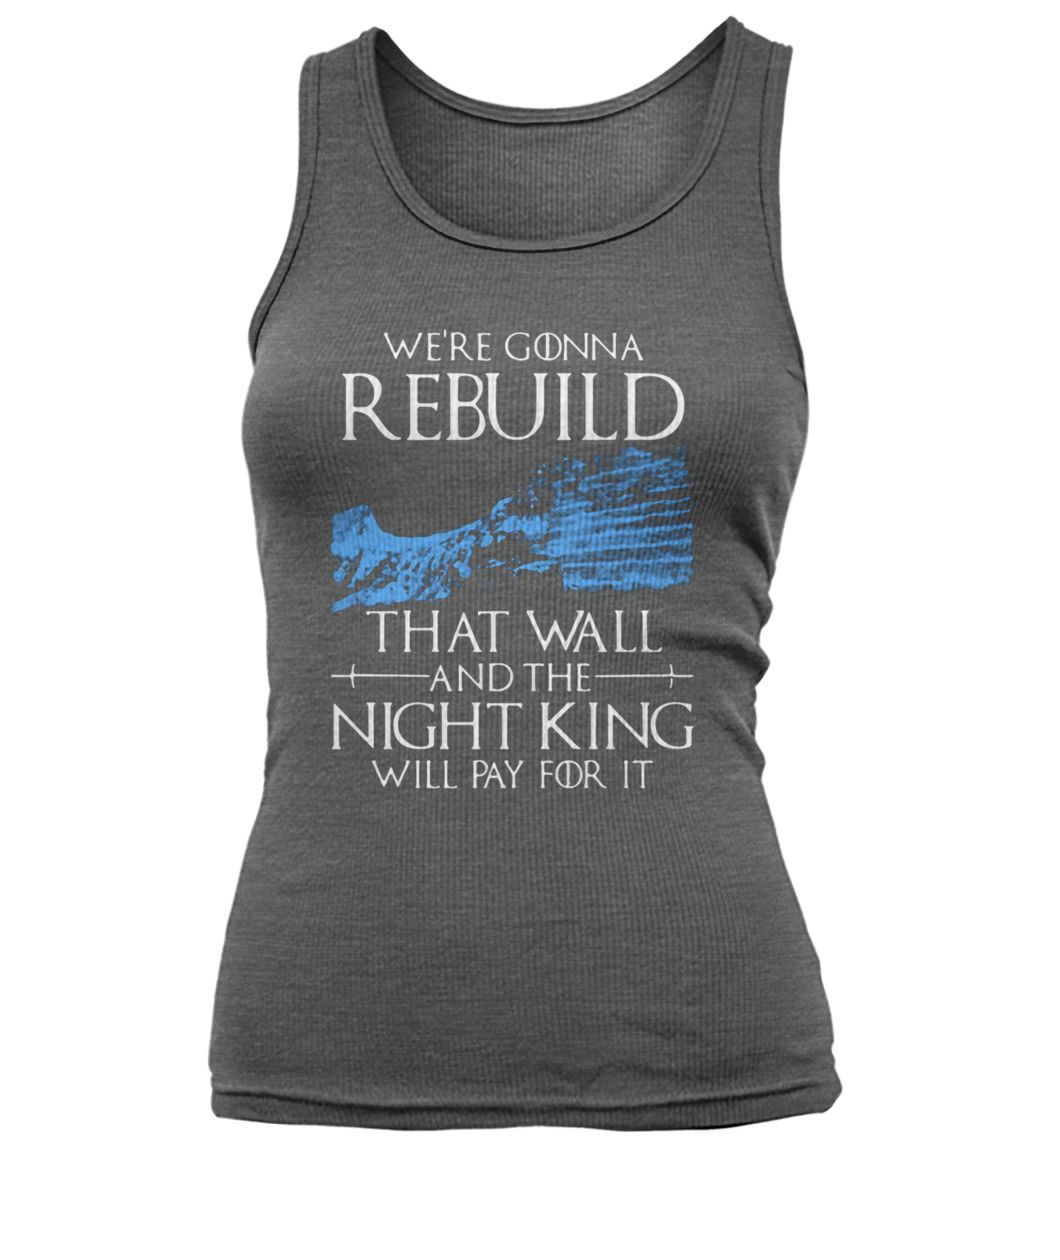 Game of thrones we're gonna rebuild that wall and the night king will pay for it women's tank top